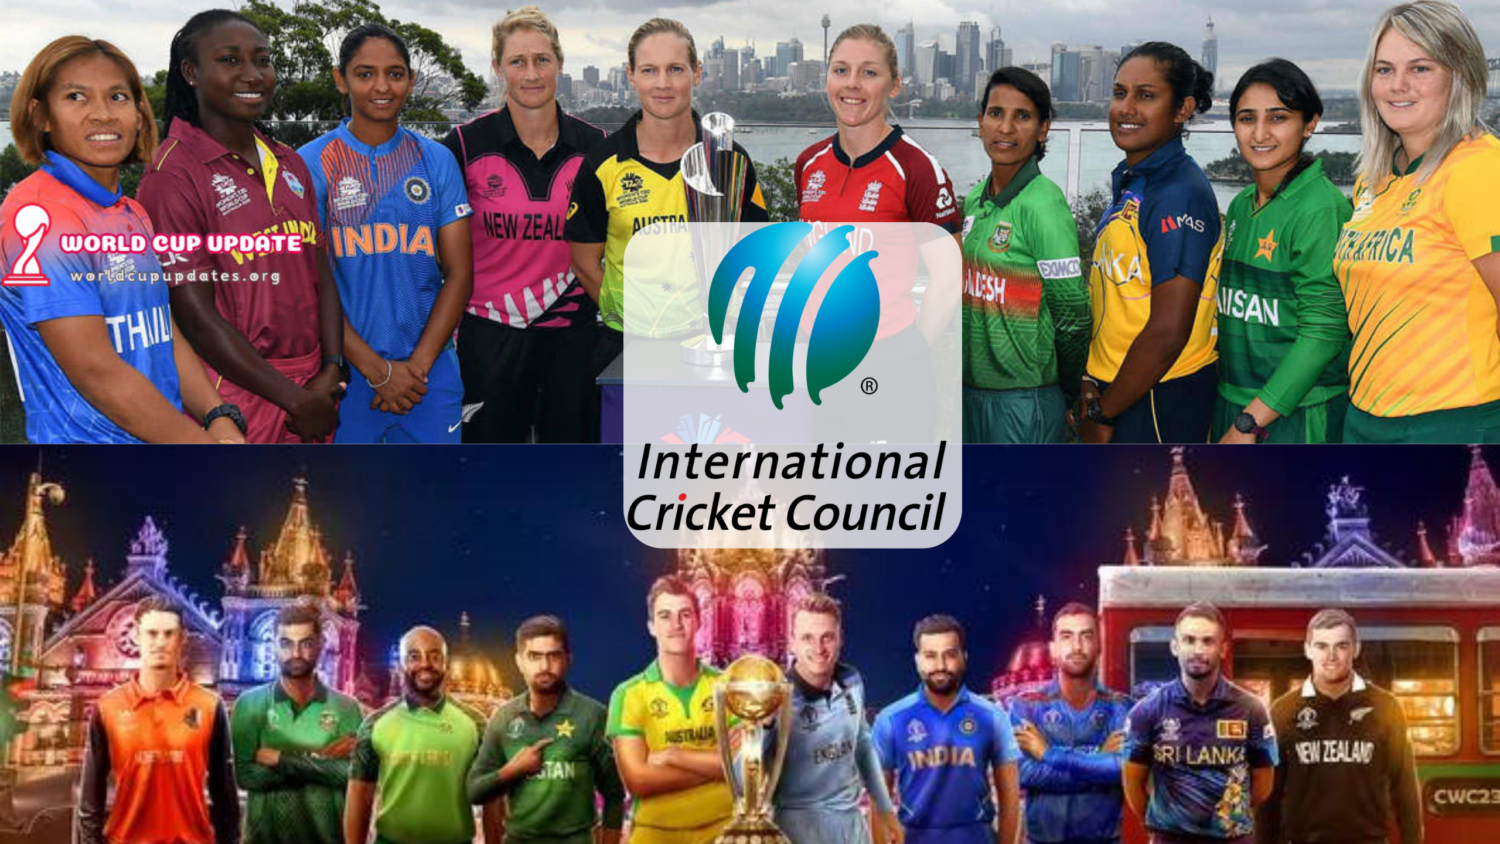 ICC Announces Equal Prize Money for Men’s and Women’s Teams: A Milestone for Pakistan Cricket and Gender Equality in Sports